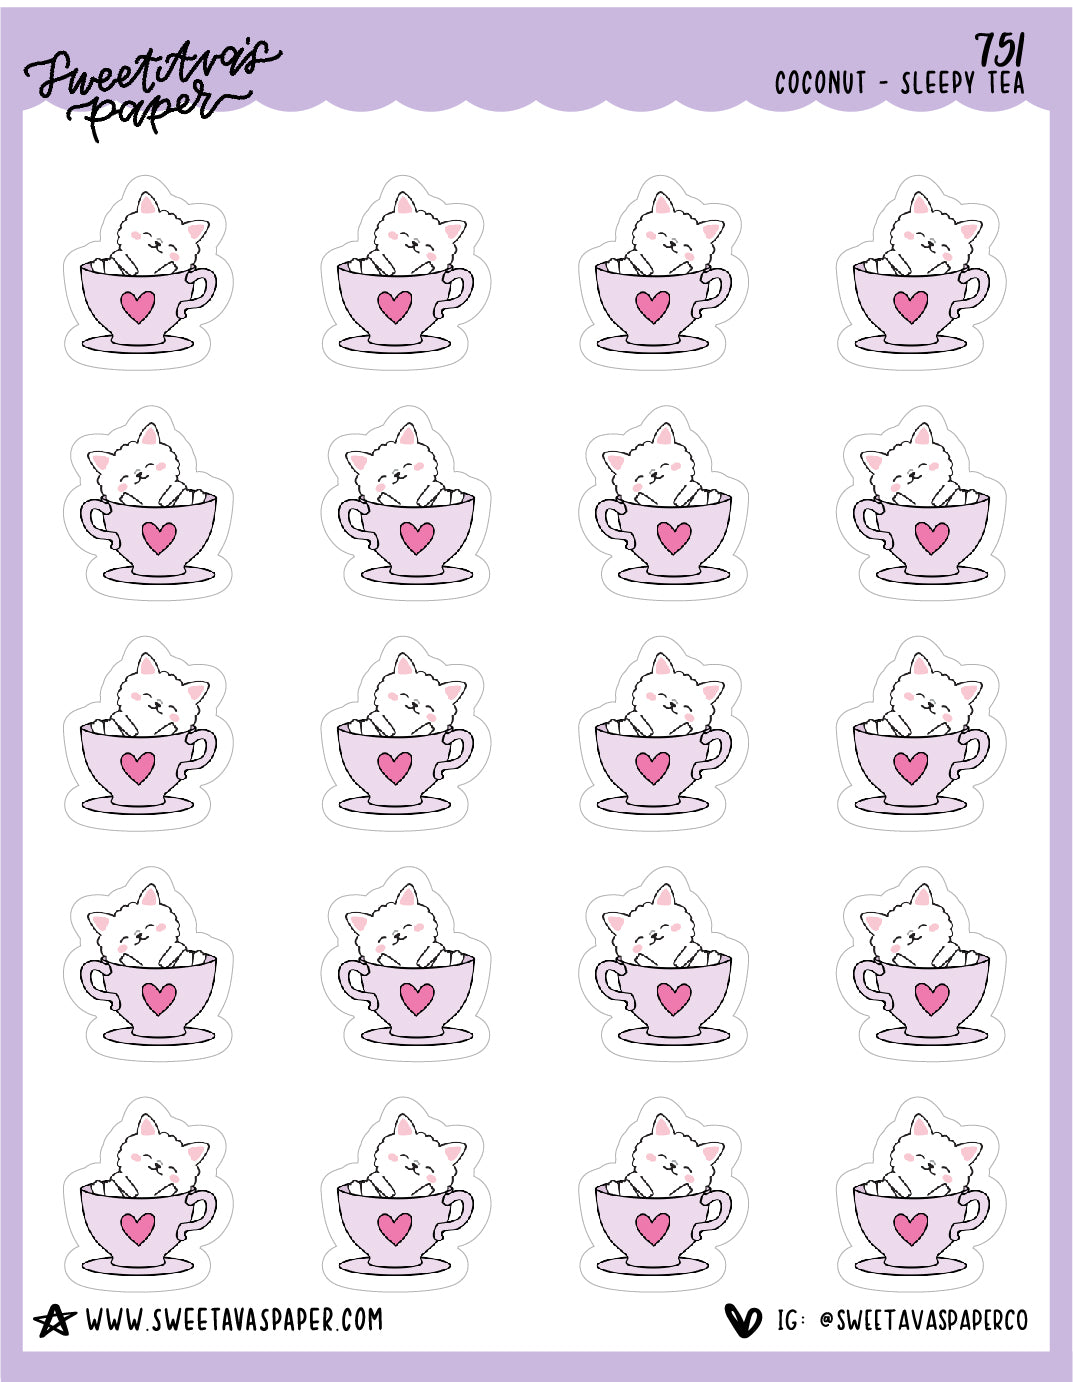 Tea Cup Planner Stickers - Coconut the Puppy [751]